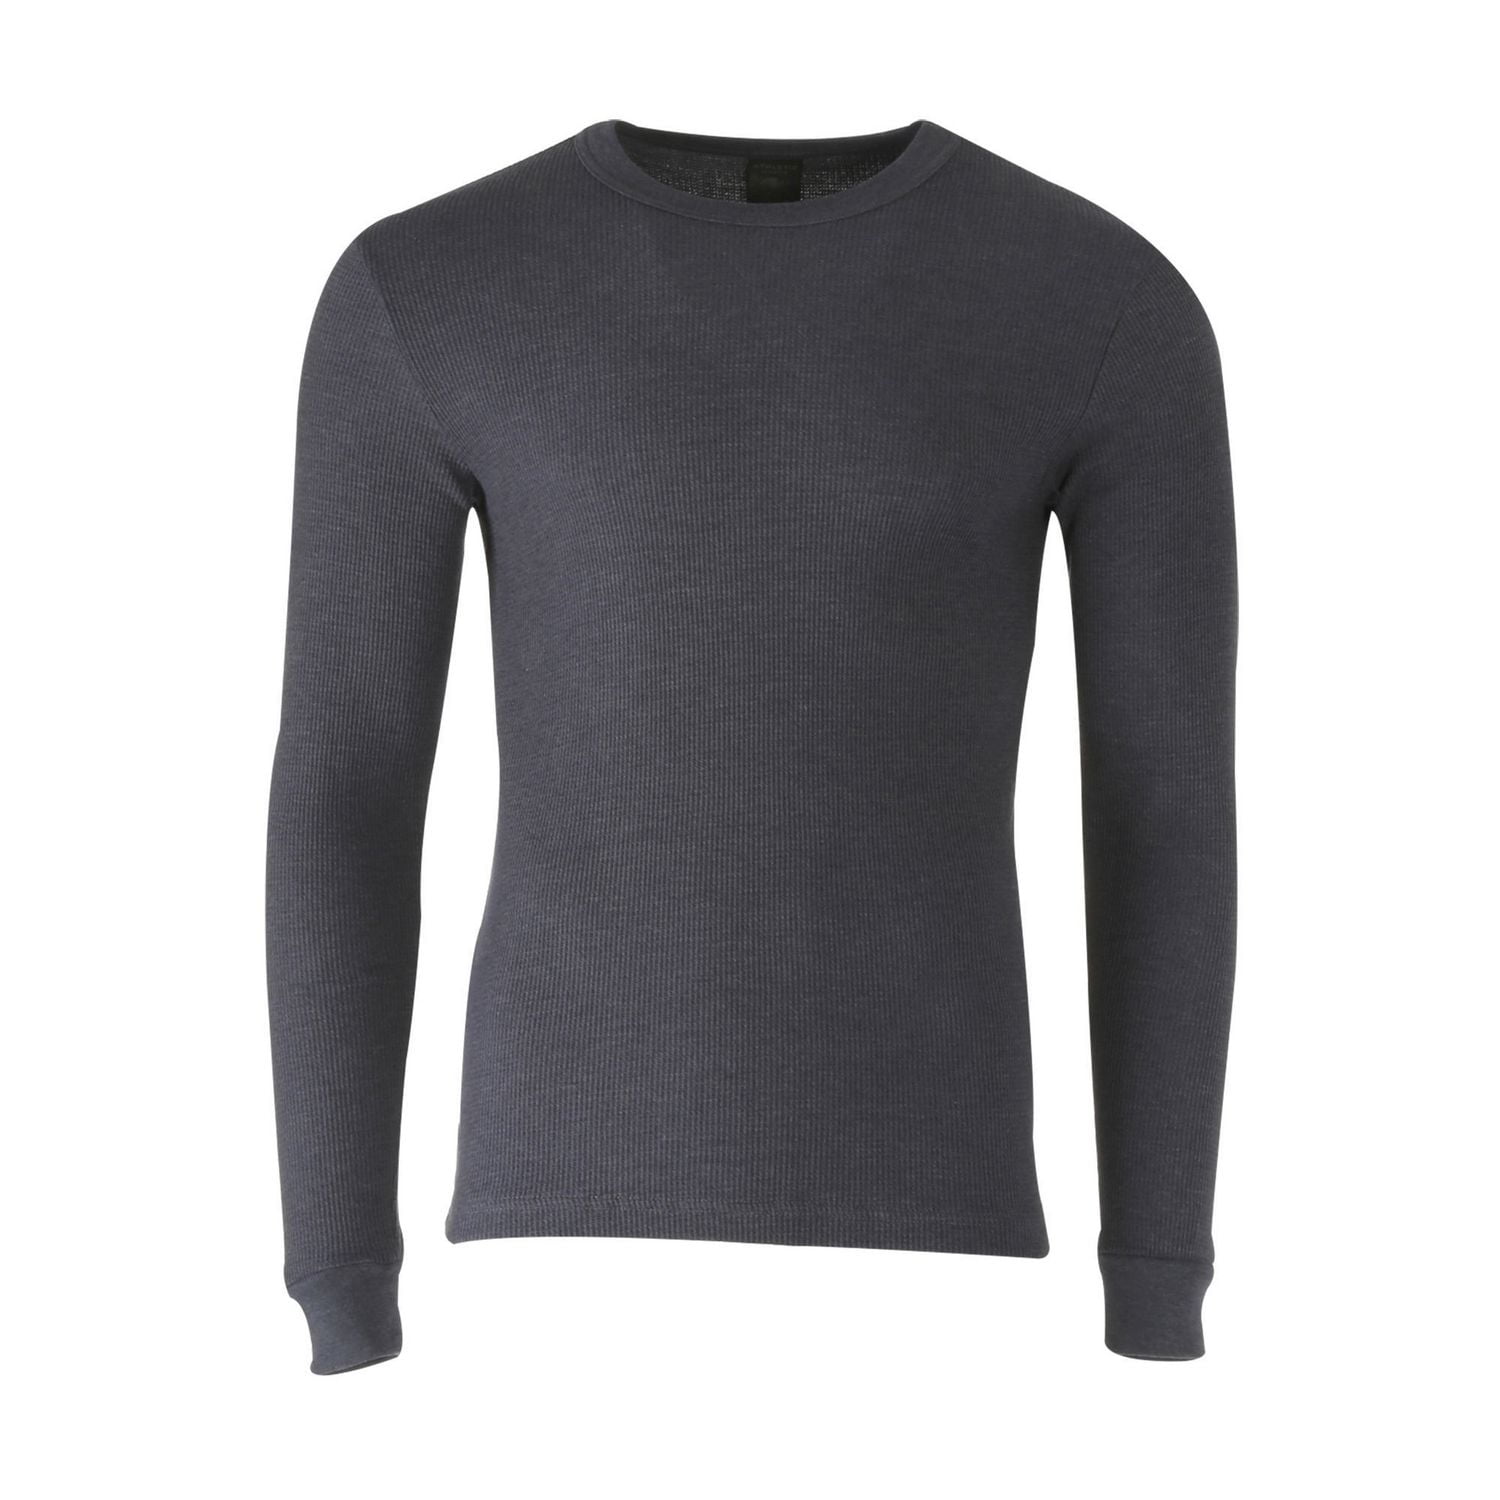 Traders Grey Waffle Knit Thermal T-Shirt - Lowes Menswear